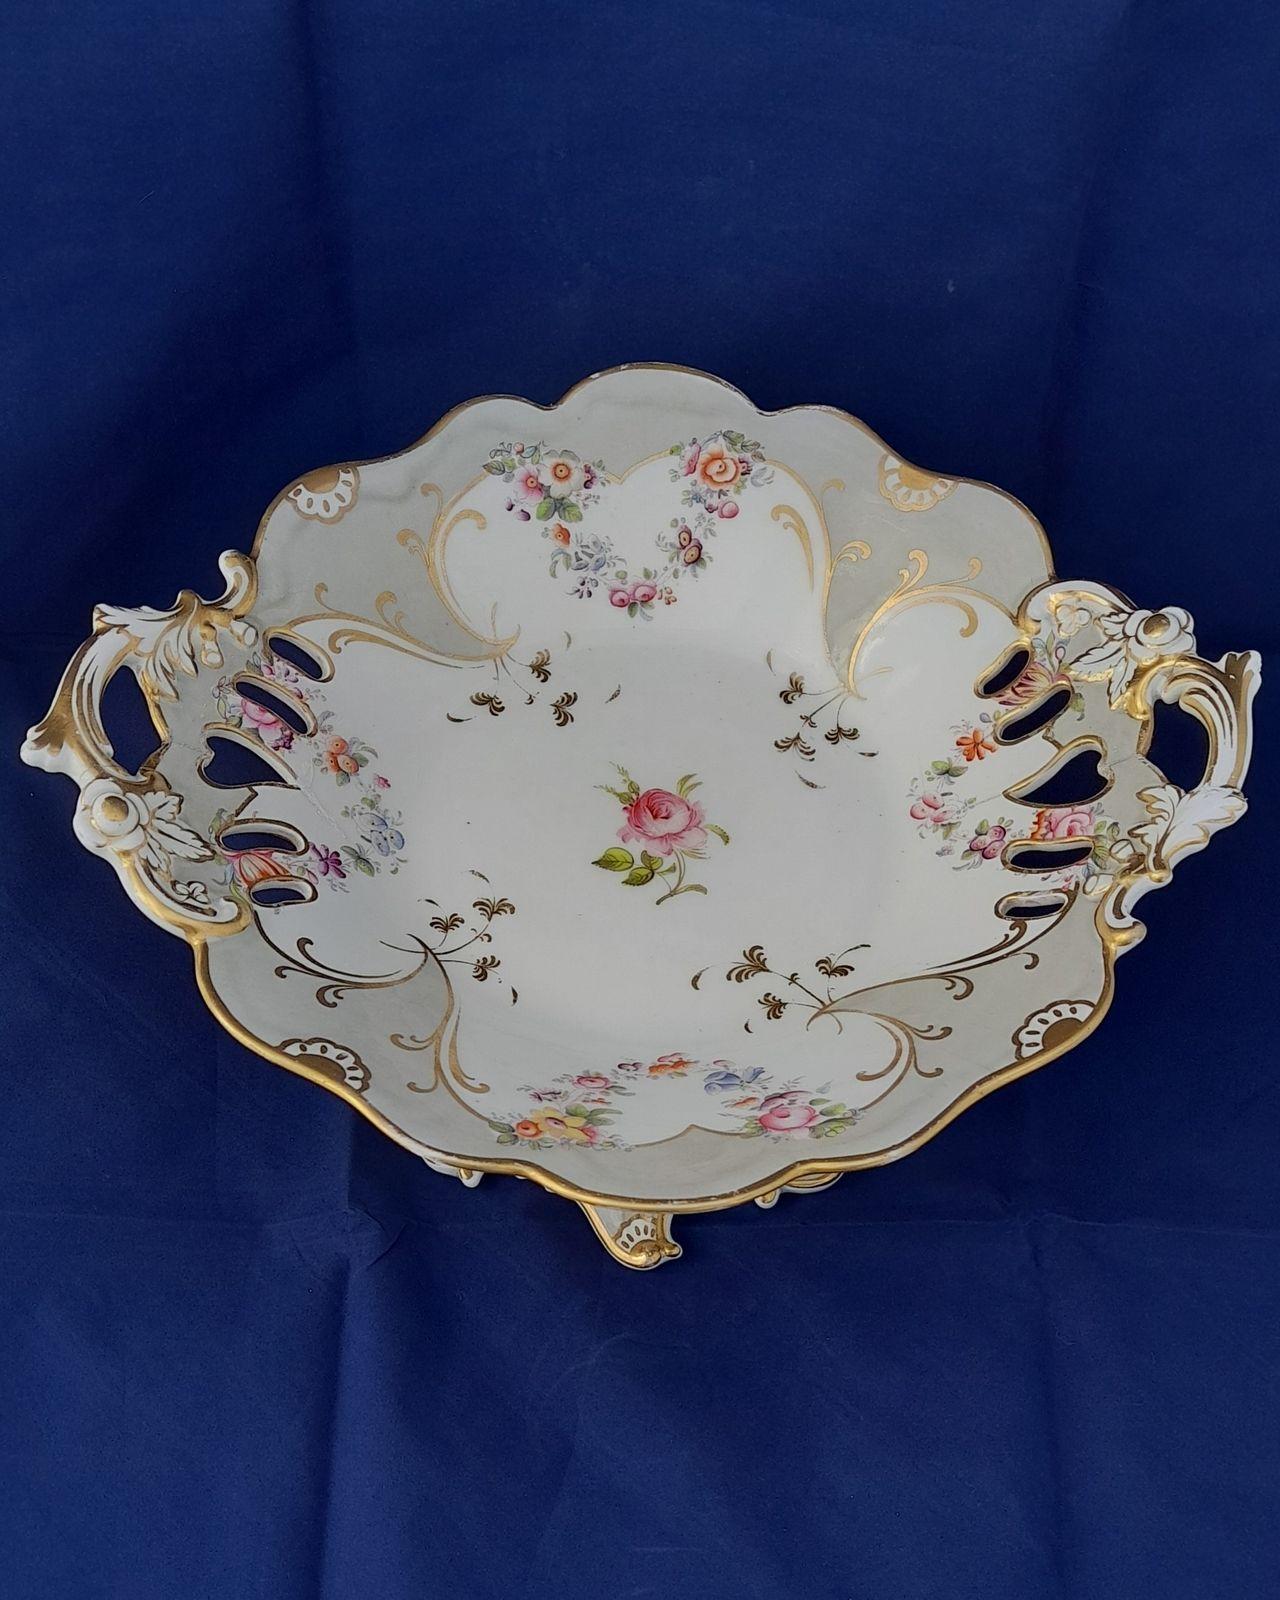 an antique large John Ridgway and Co porcelain comport shaped and pierced in a rococo revival style printed and hand painted in pattern number 5836 circa 1840